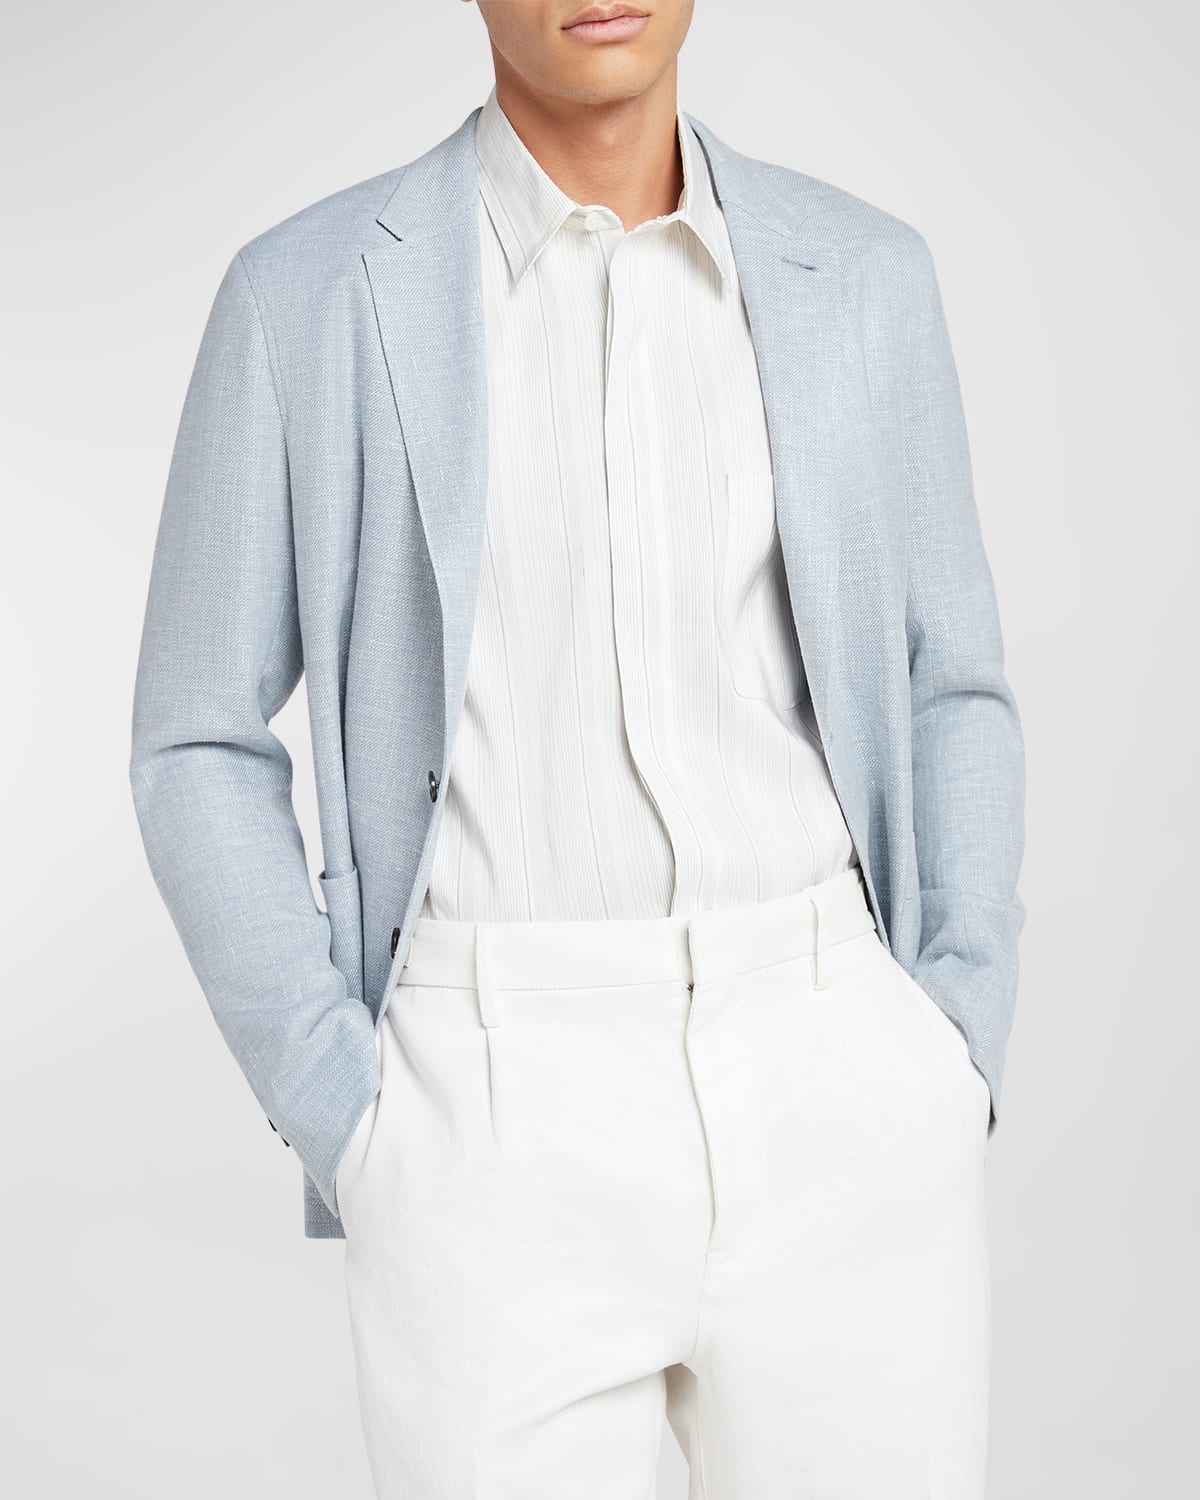 Zegna Men's Crossover Linen And Wool-blend Shirt Jacket In Bright Blue Solid